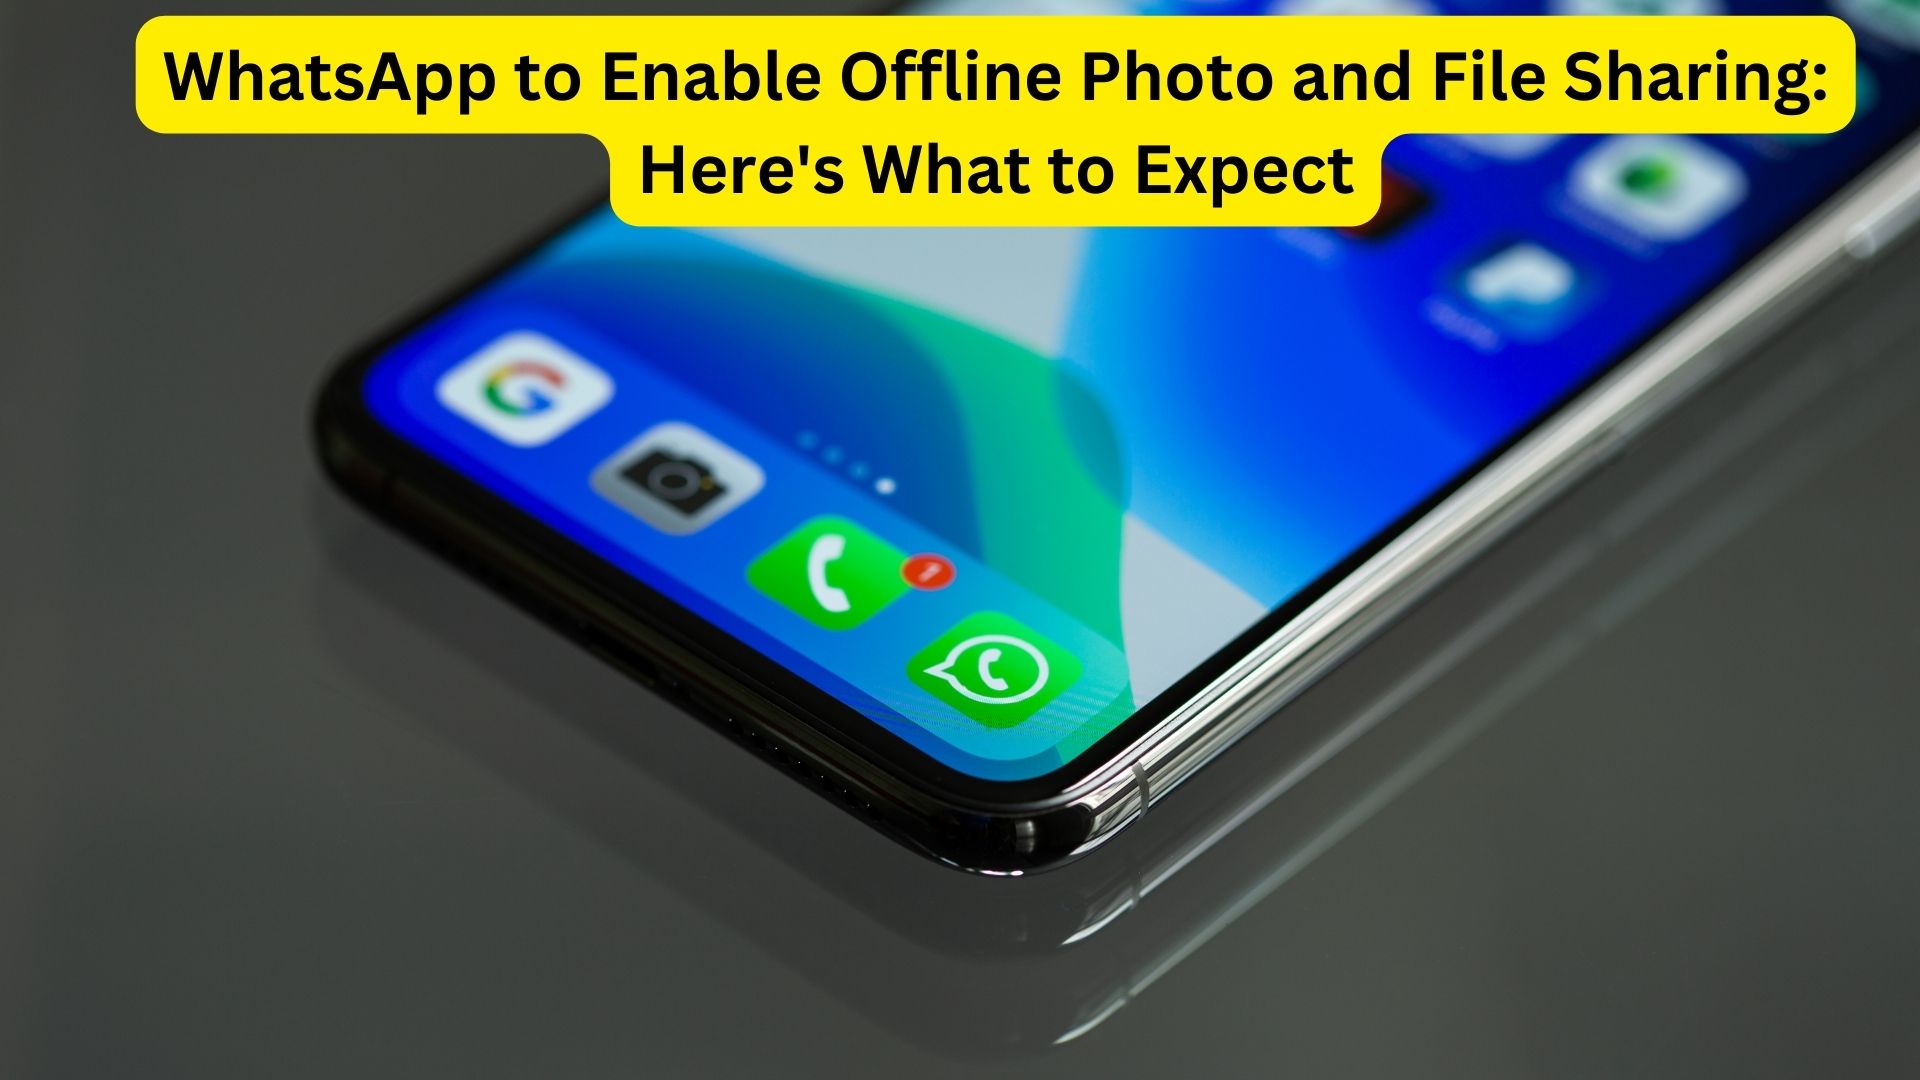 WhatsApp to Enable Offline Photo and File Sharing: Here's What to Expect